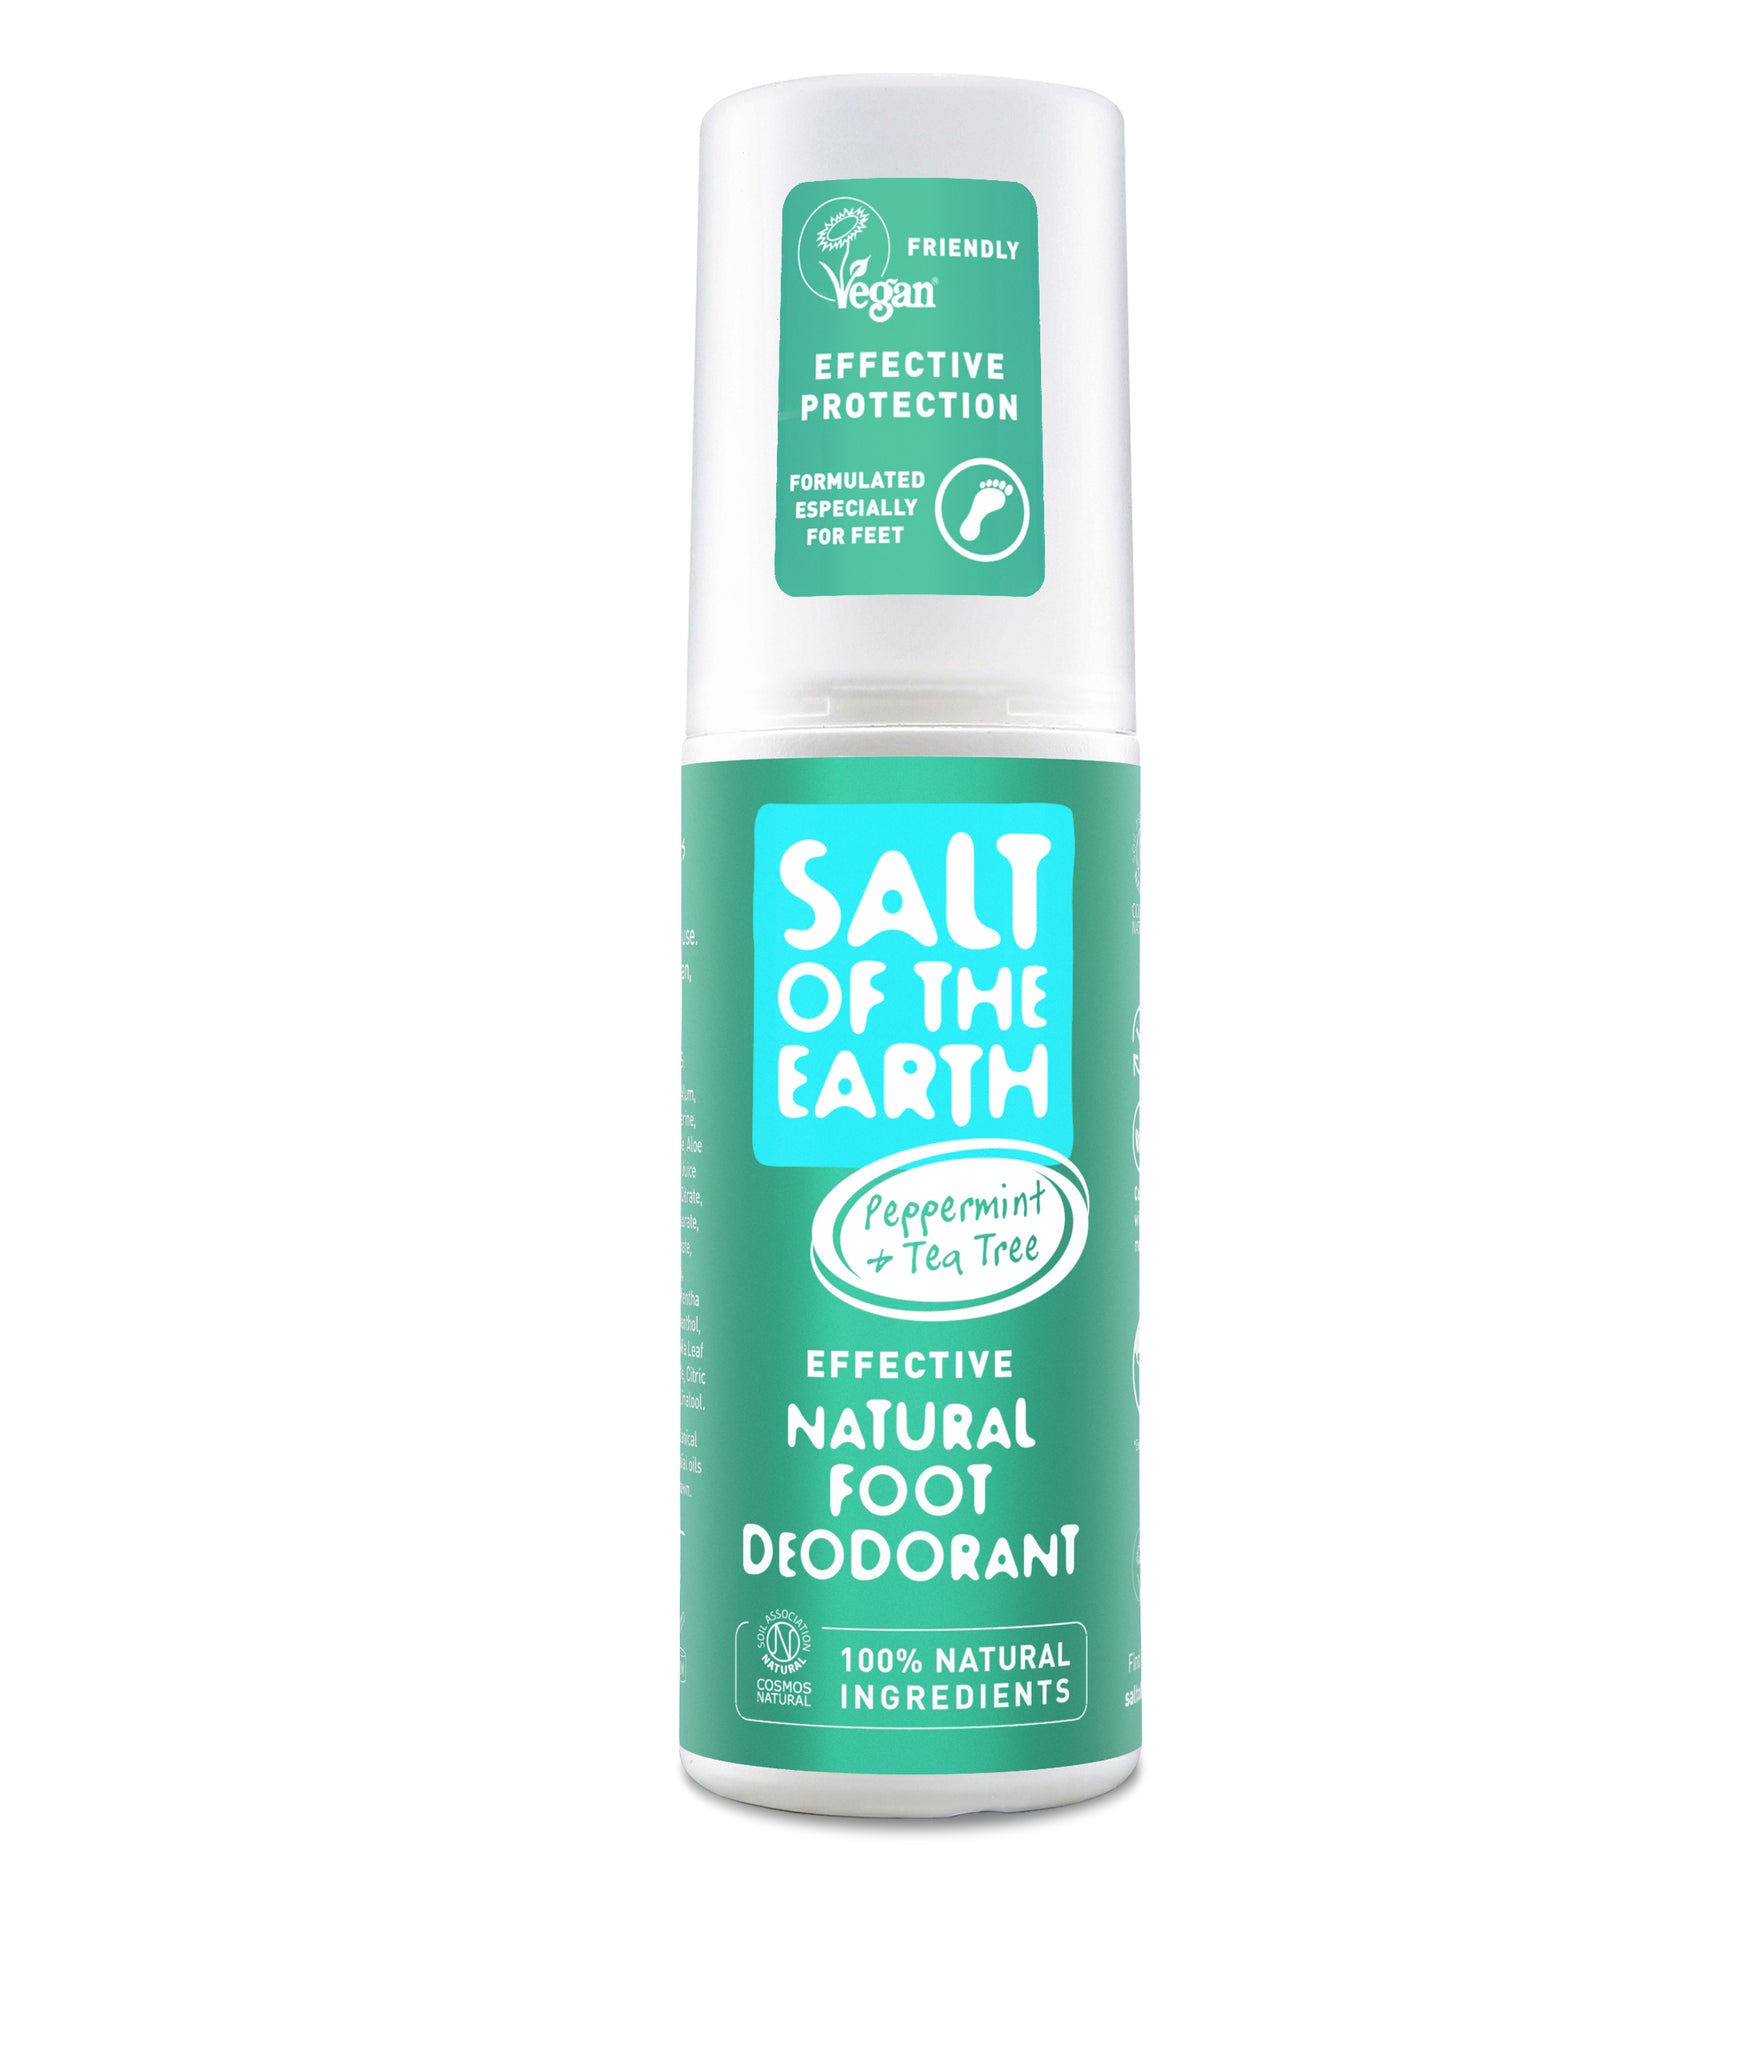 Salt of the Earth’s First Natural Deodorant Foot Spray